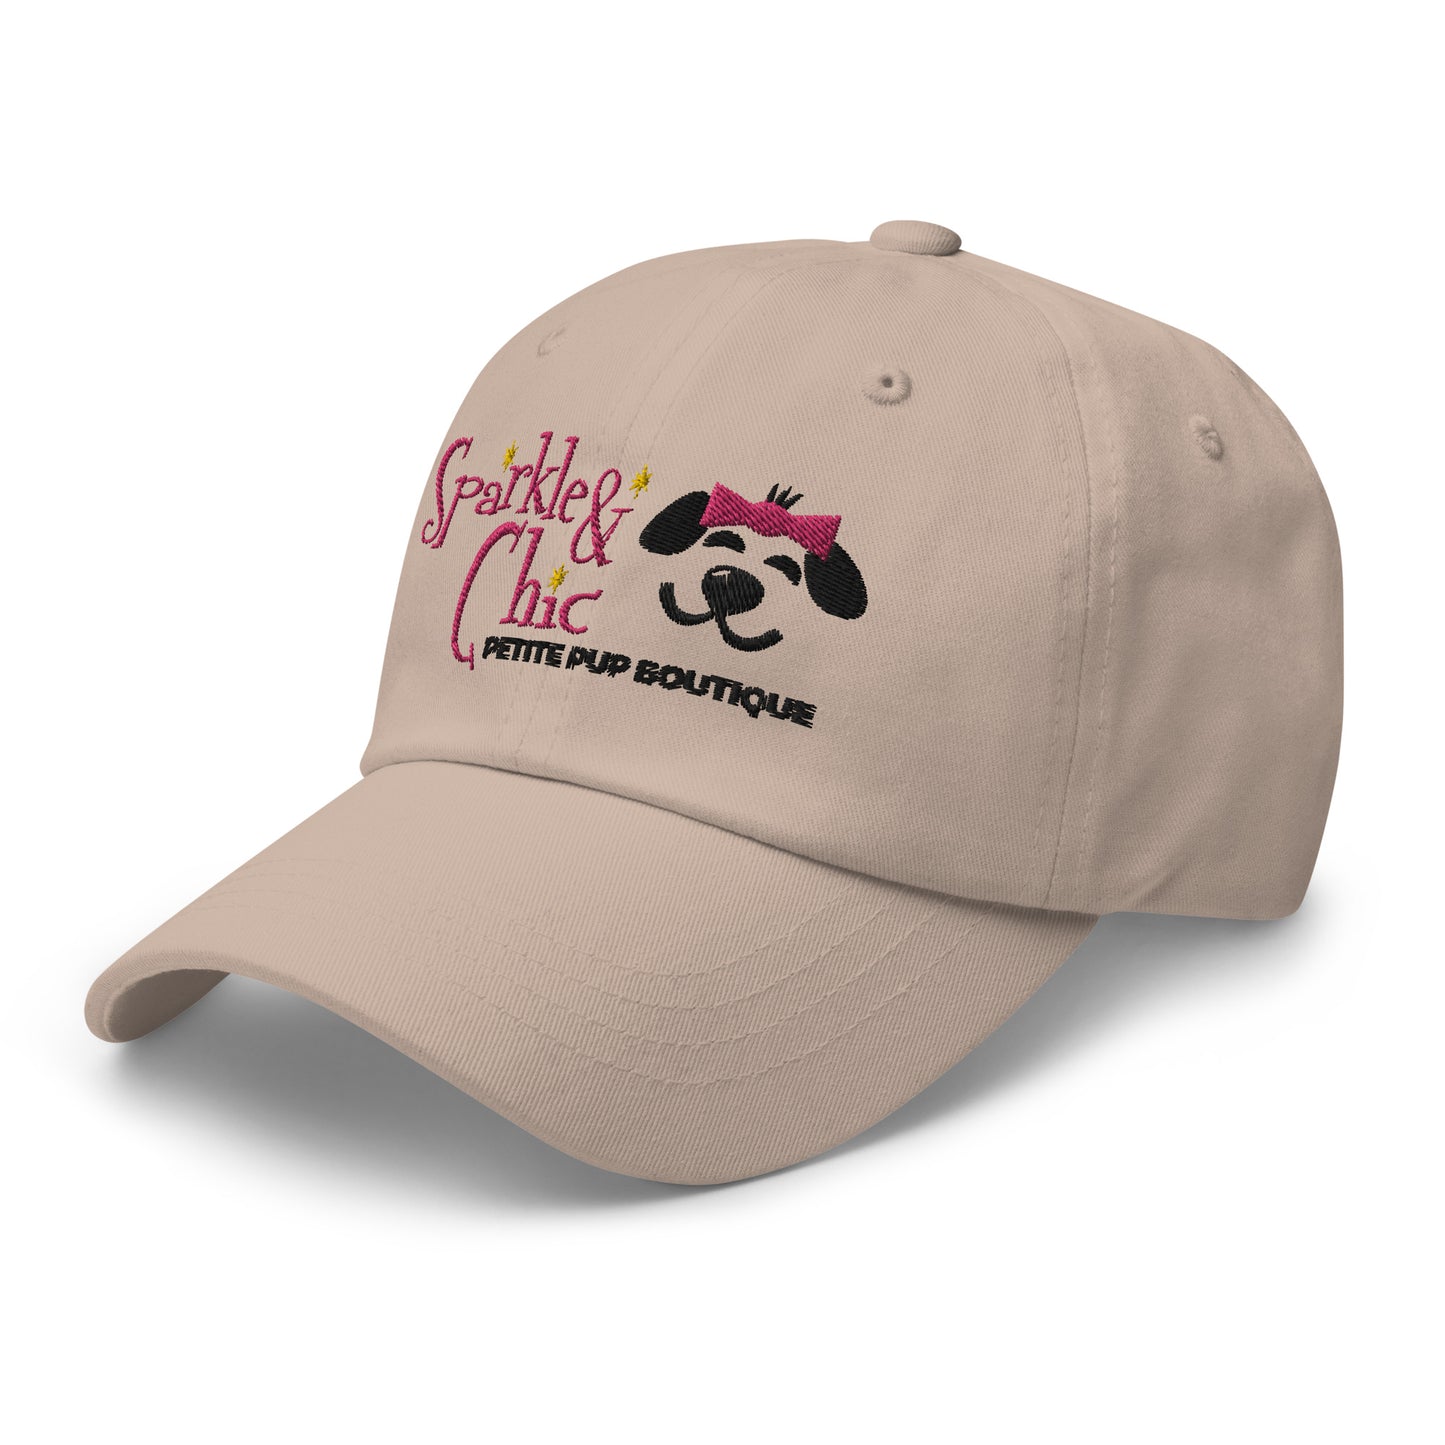 Sparkle & Chic Branded Ball Cap